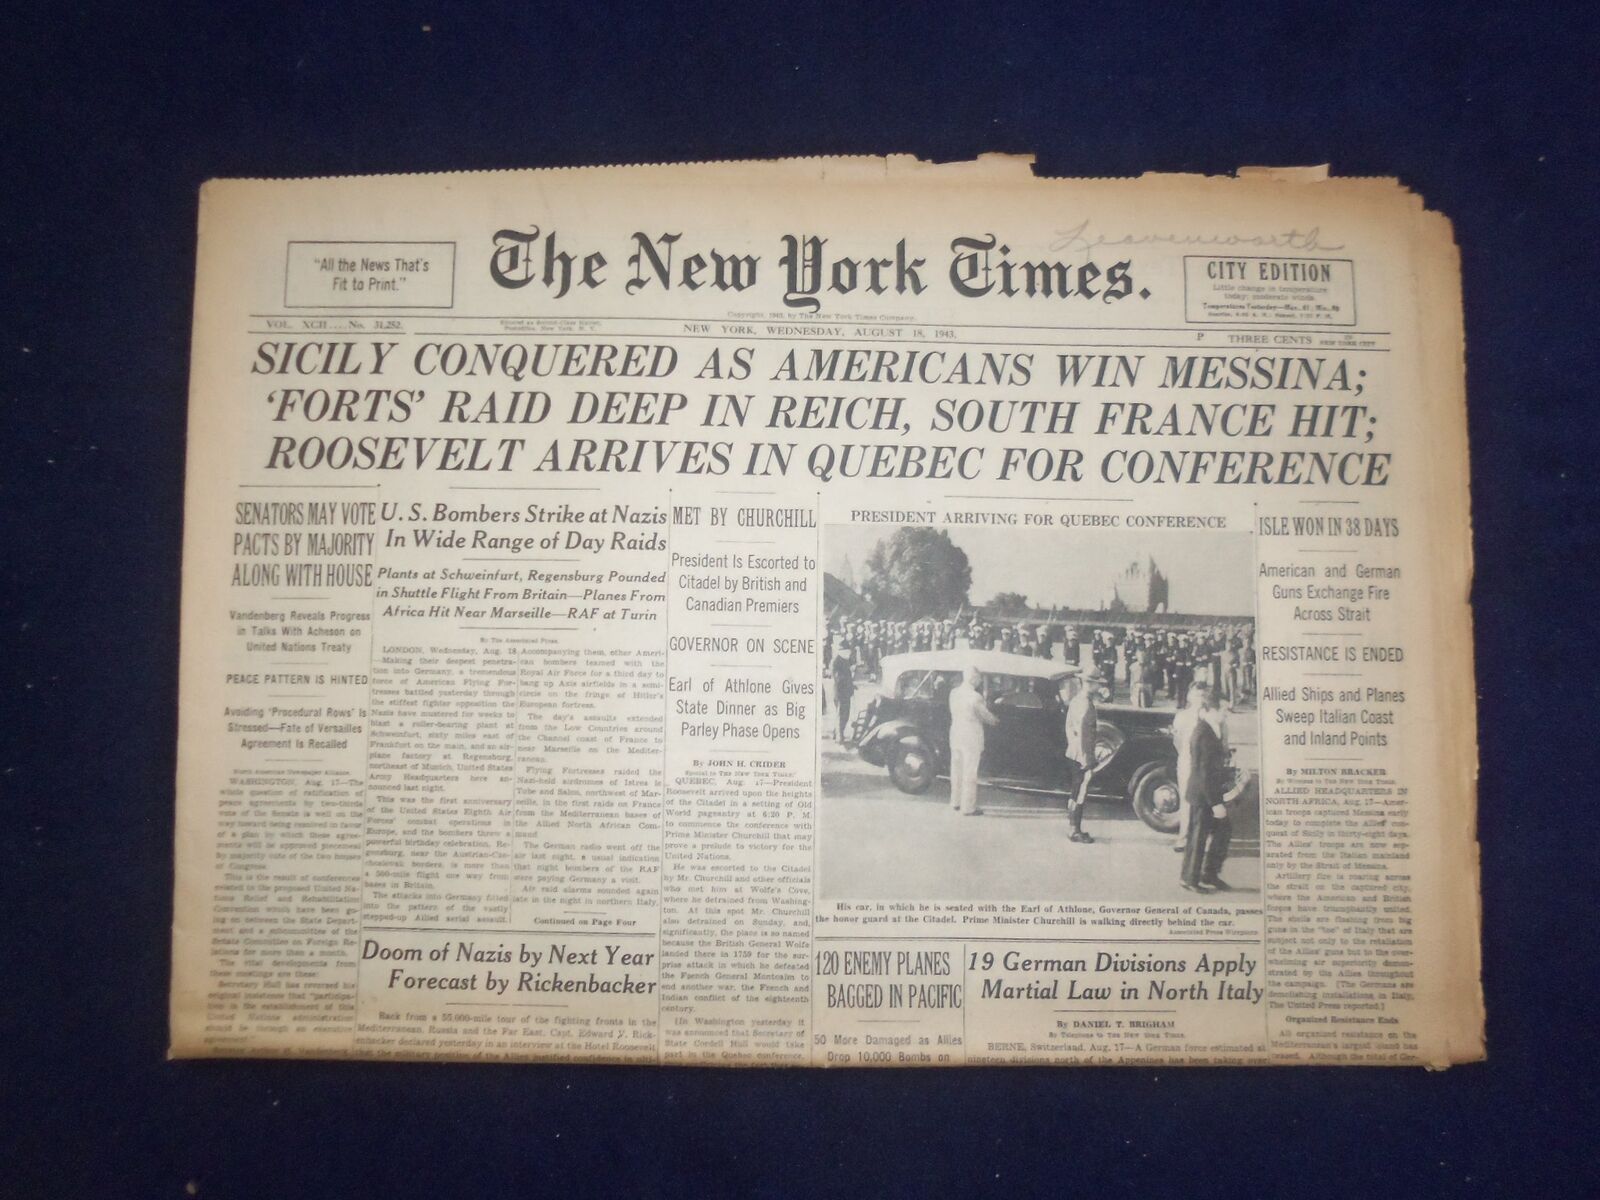 1943 AUG 18 NEW YORK TIMES - SICILY CONQUERED AS AMERICANS WIN MESSINA - NP 6551